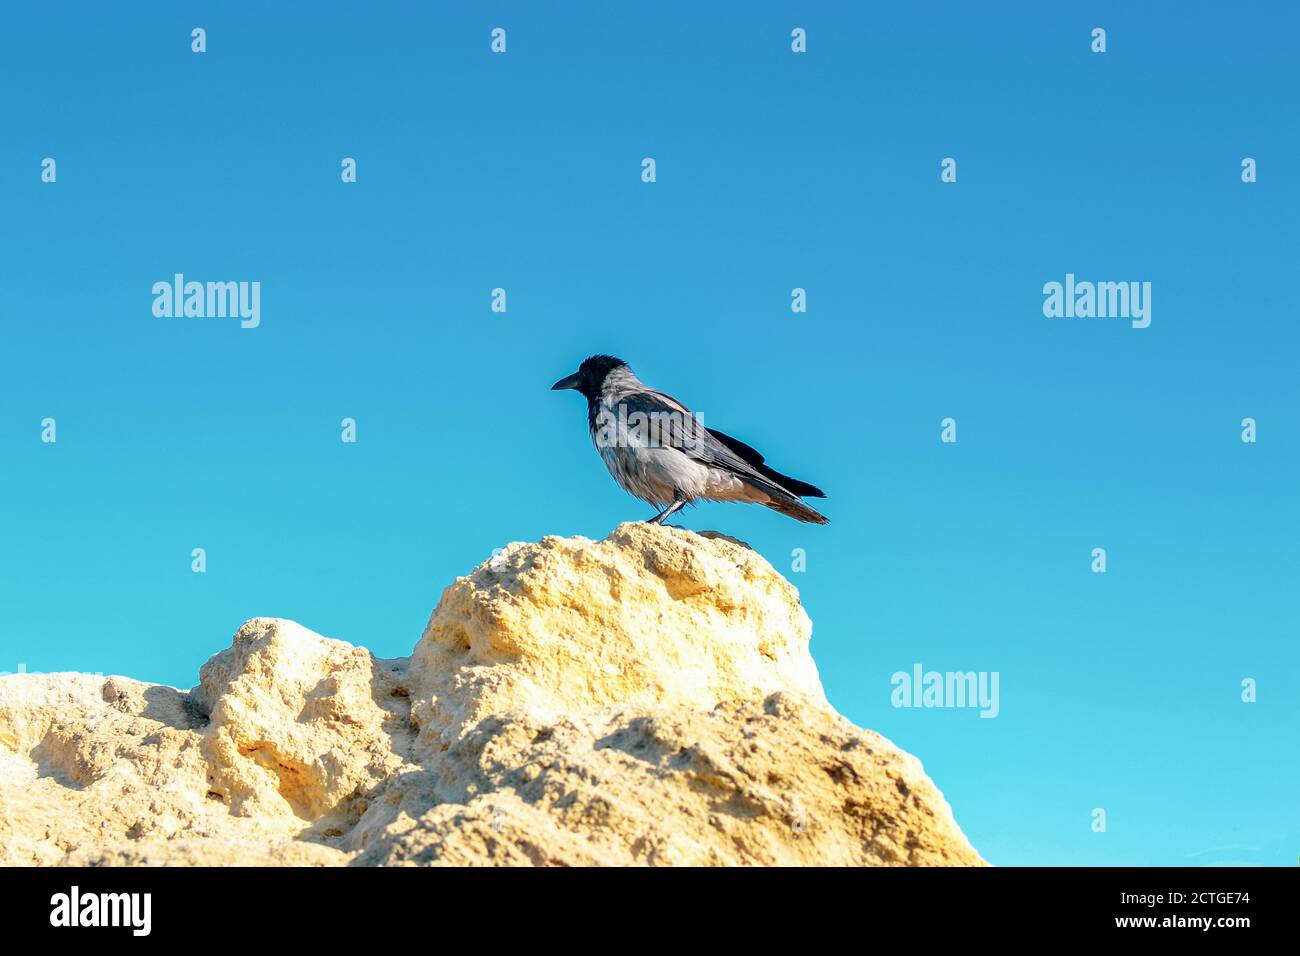 A black raven sits on a rock. Bird on a rock against a blue clear sky. Minimal concept of nature Stock Photo